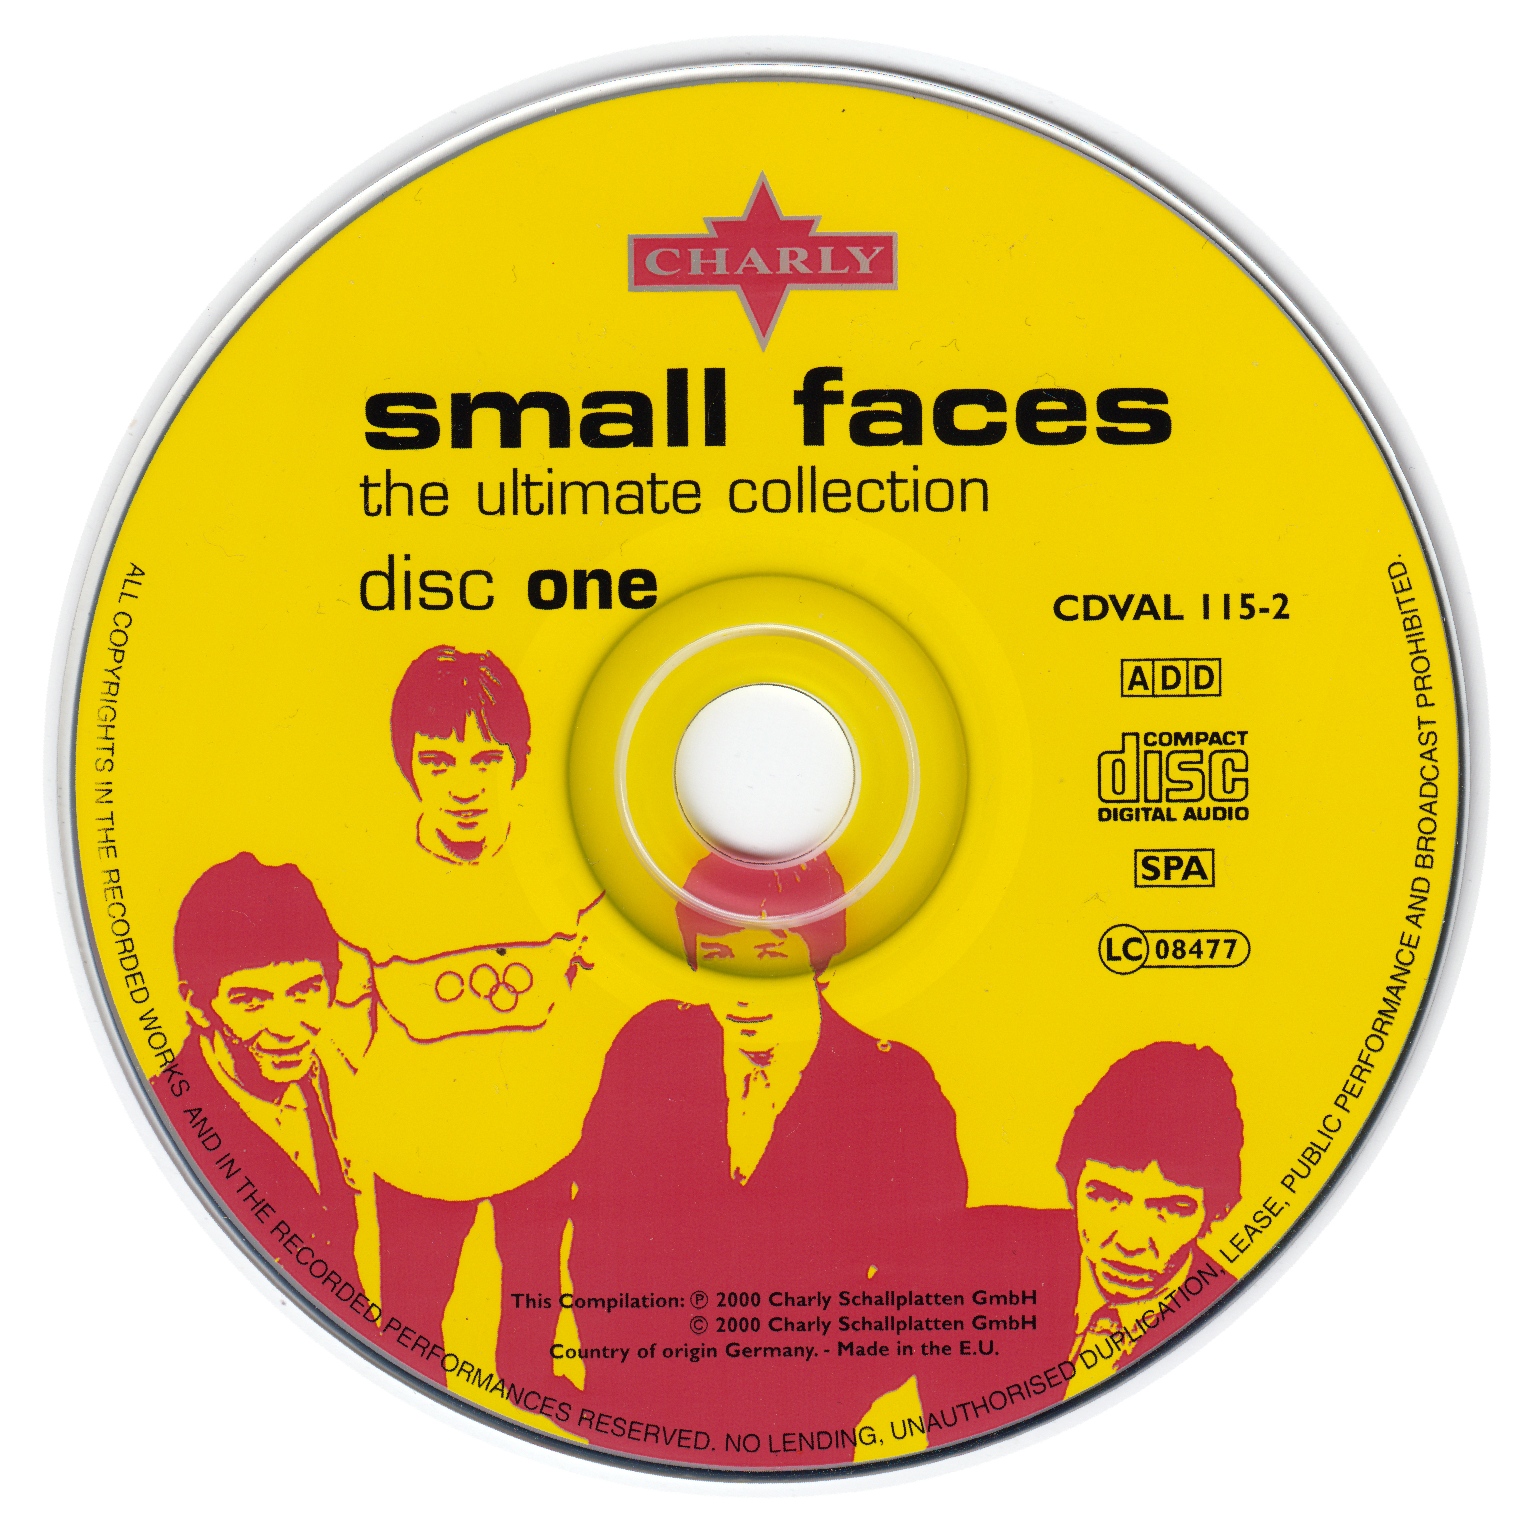 Release “The Ultimate Collection” by Small Faces - Cover Art 